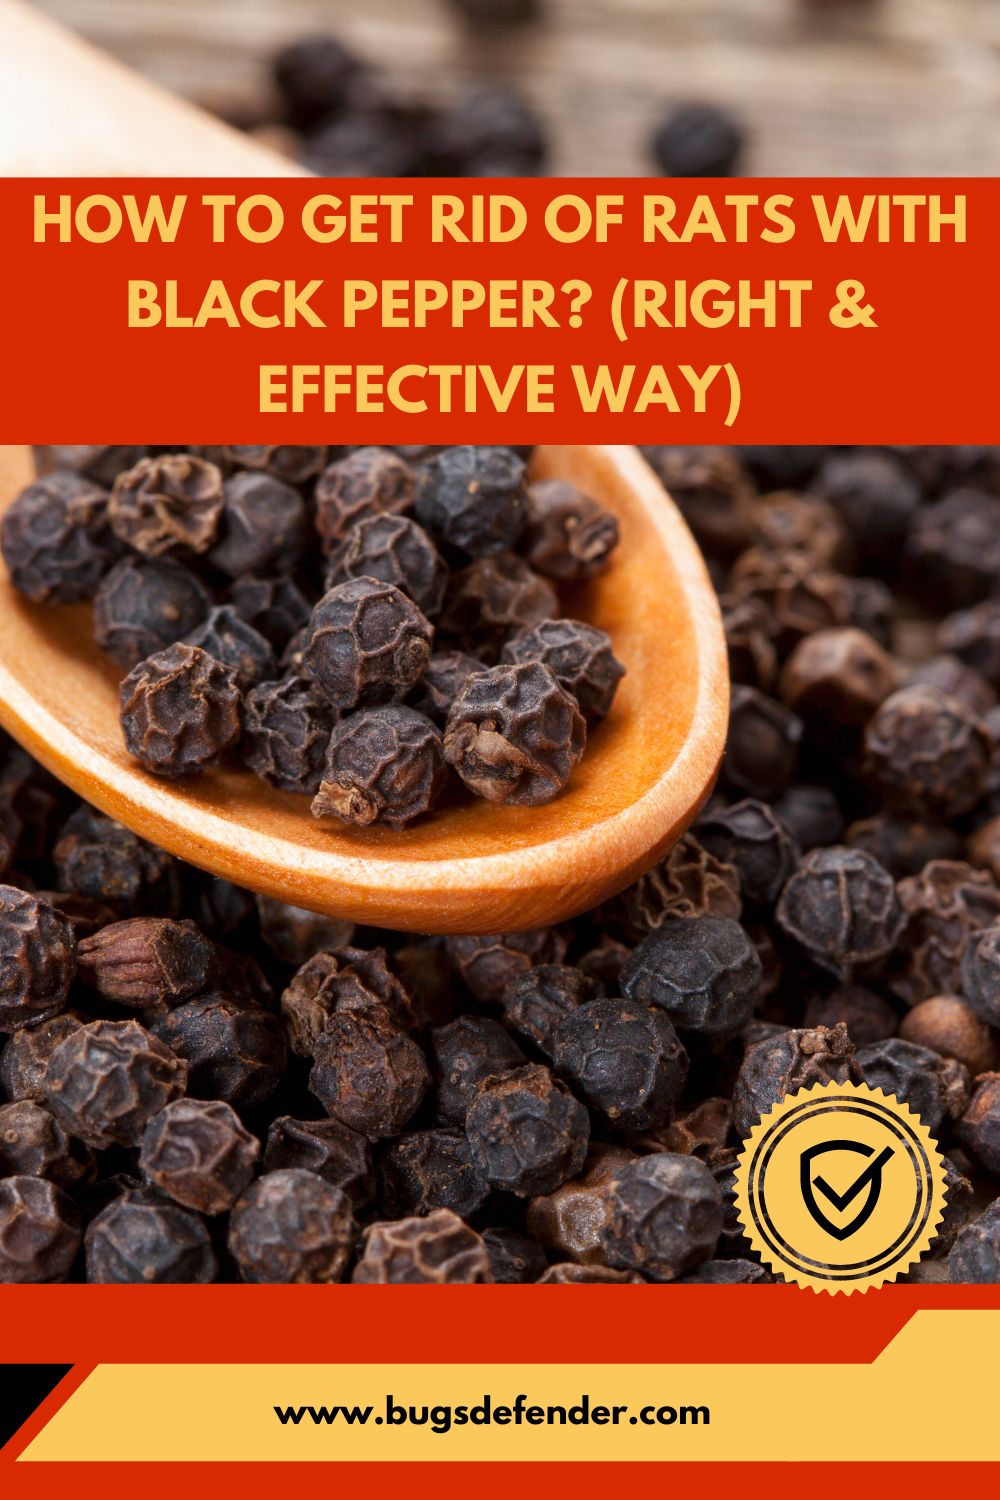 How To Get Rid Of Rats With Black Pepper? (Right & Effective Way) pin1